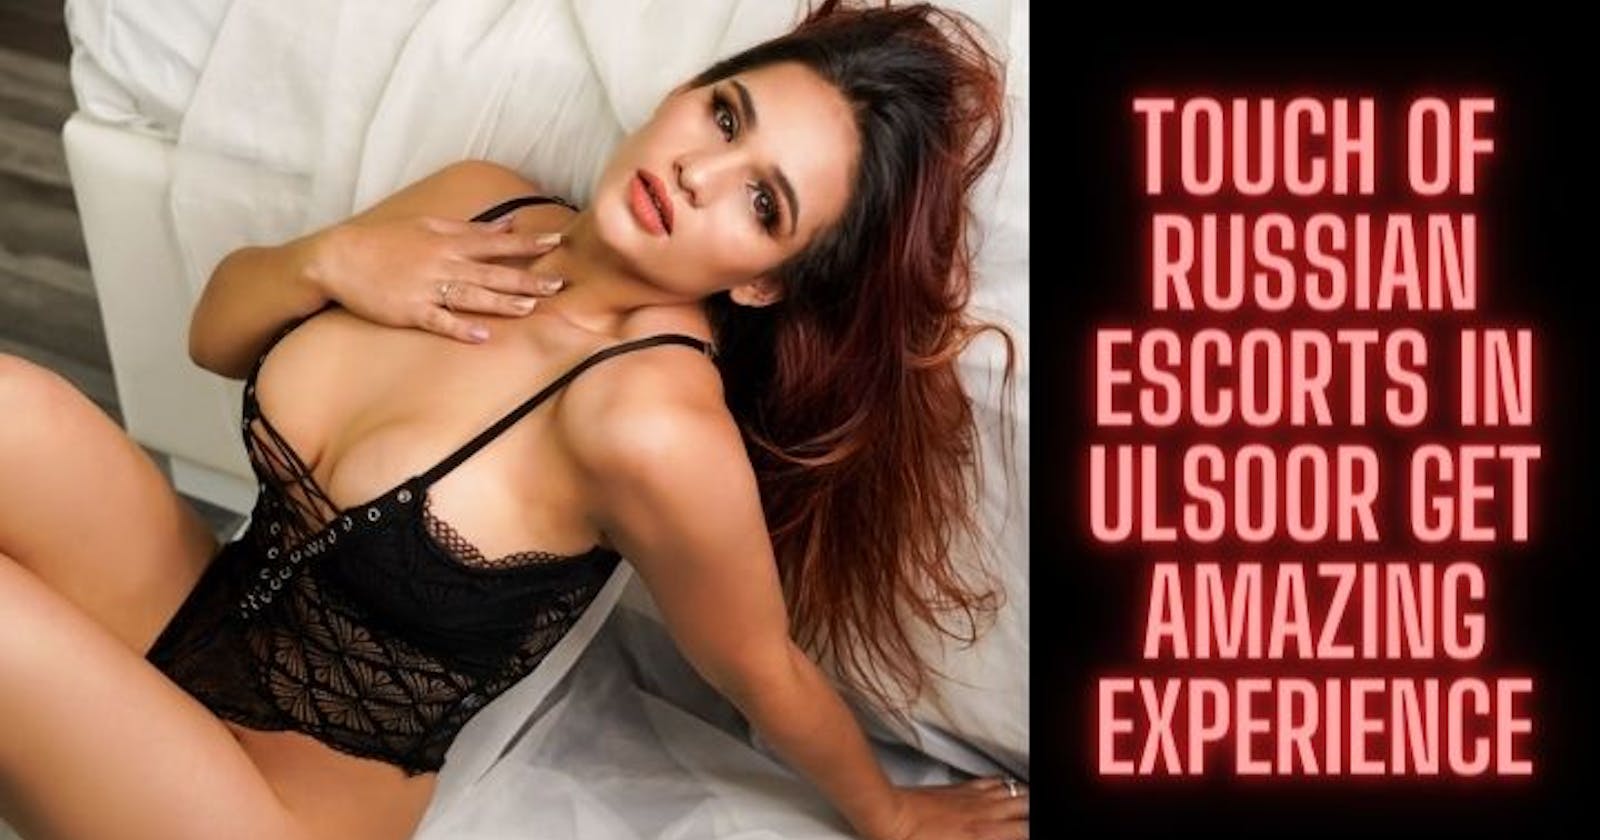 Touch of Russian Escorts in Ulsoor Get Amazing Experience